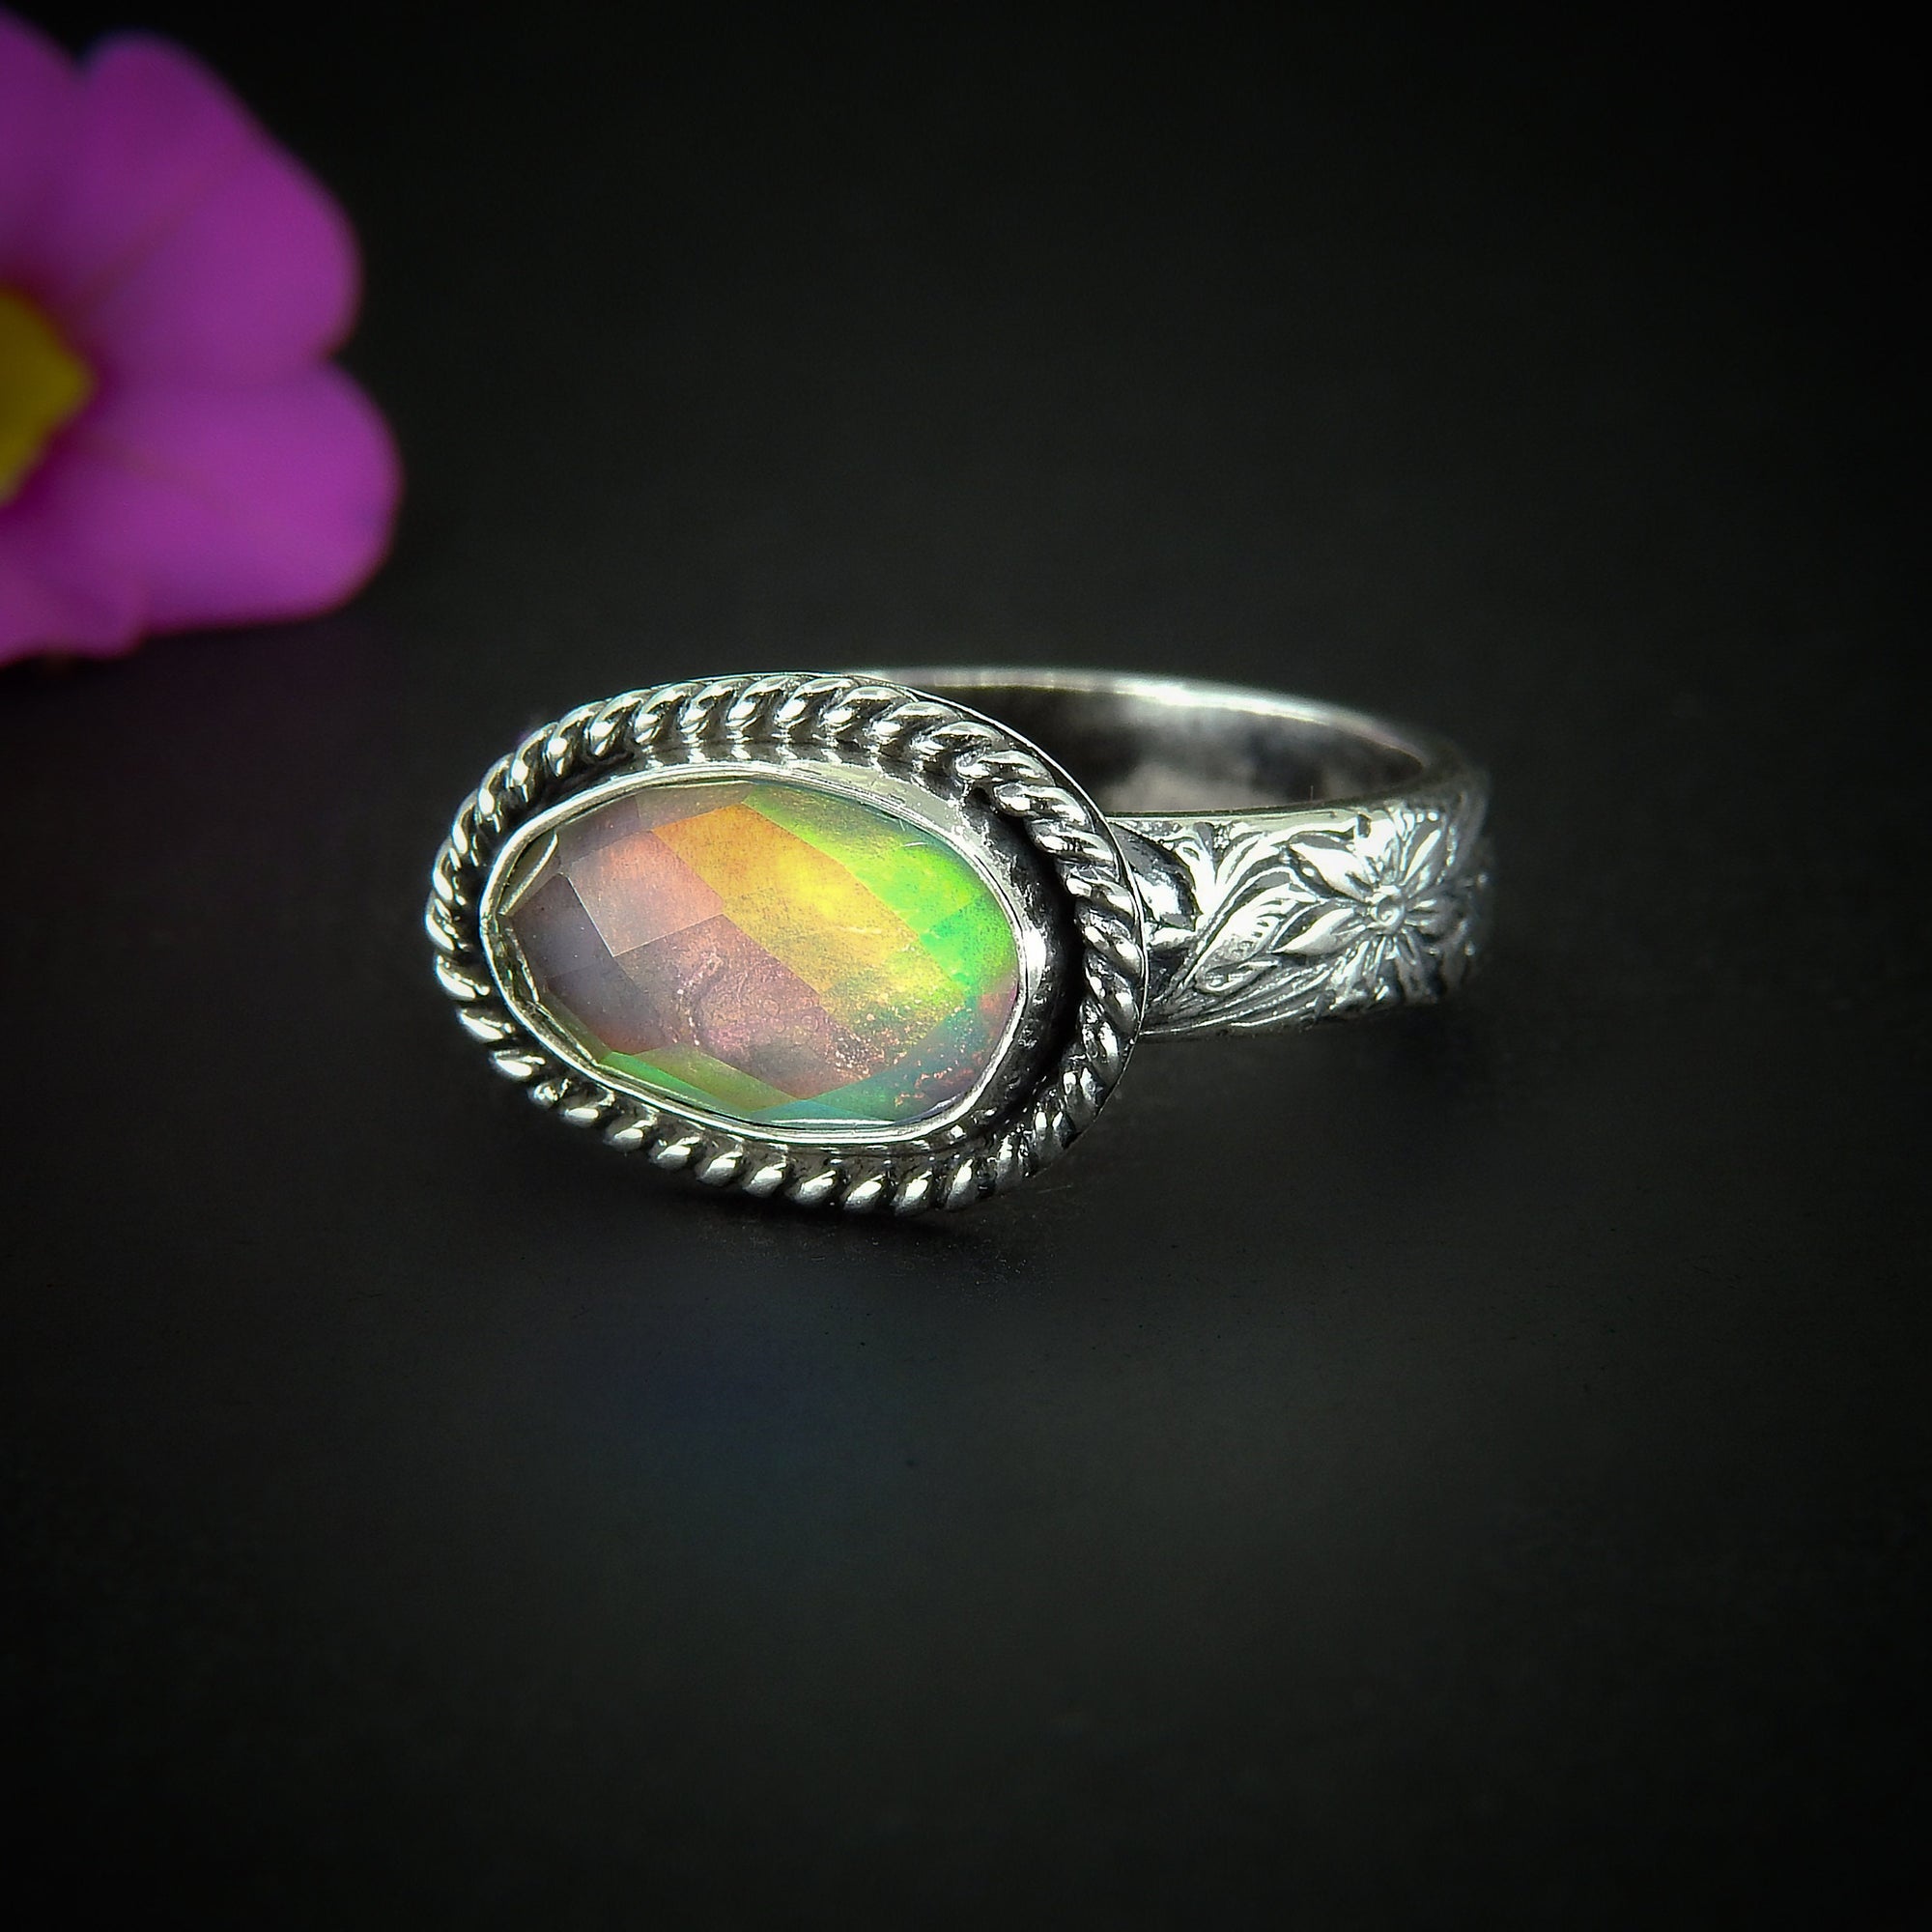 Rose Cut Clear Quartz & Aurora Opal Ring - Size 9 - Sterling Silver - Pastel Rainbow Opal Jewellery - Thick Floral Ring Band Rainbow Crystal